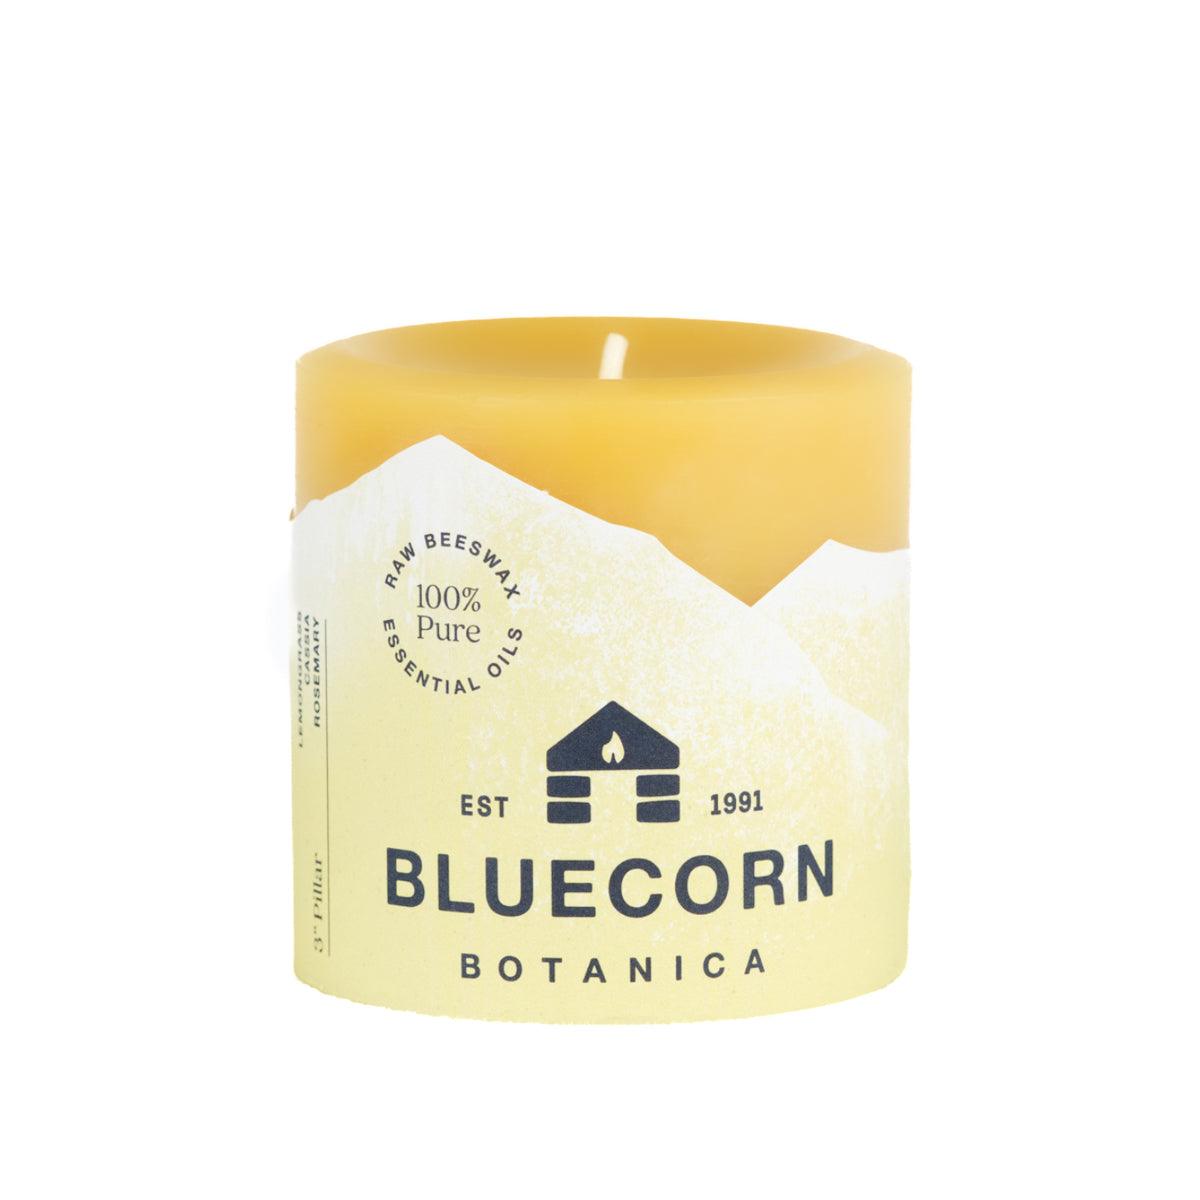 Botanica Beeswax Scented Candle - 3-Wick Lemongrass - Cassia - Rosemary